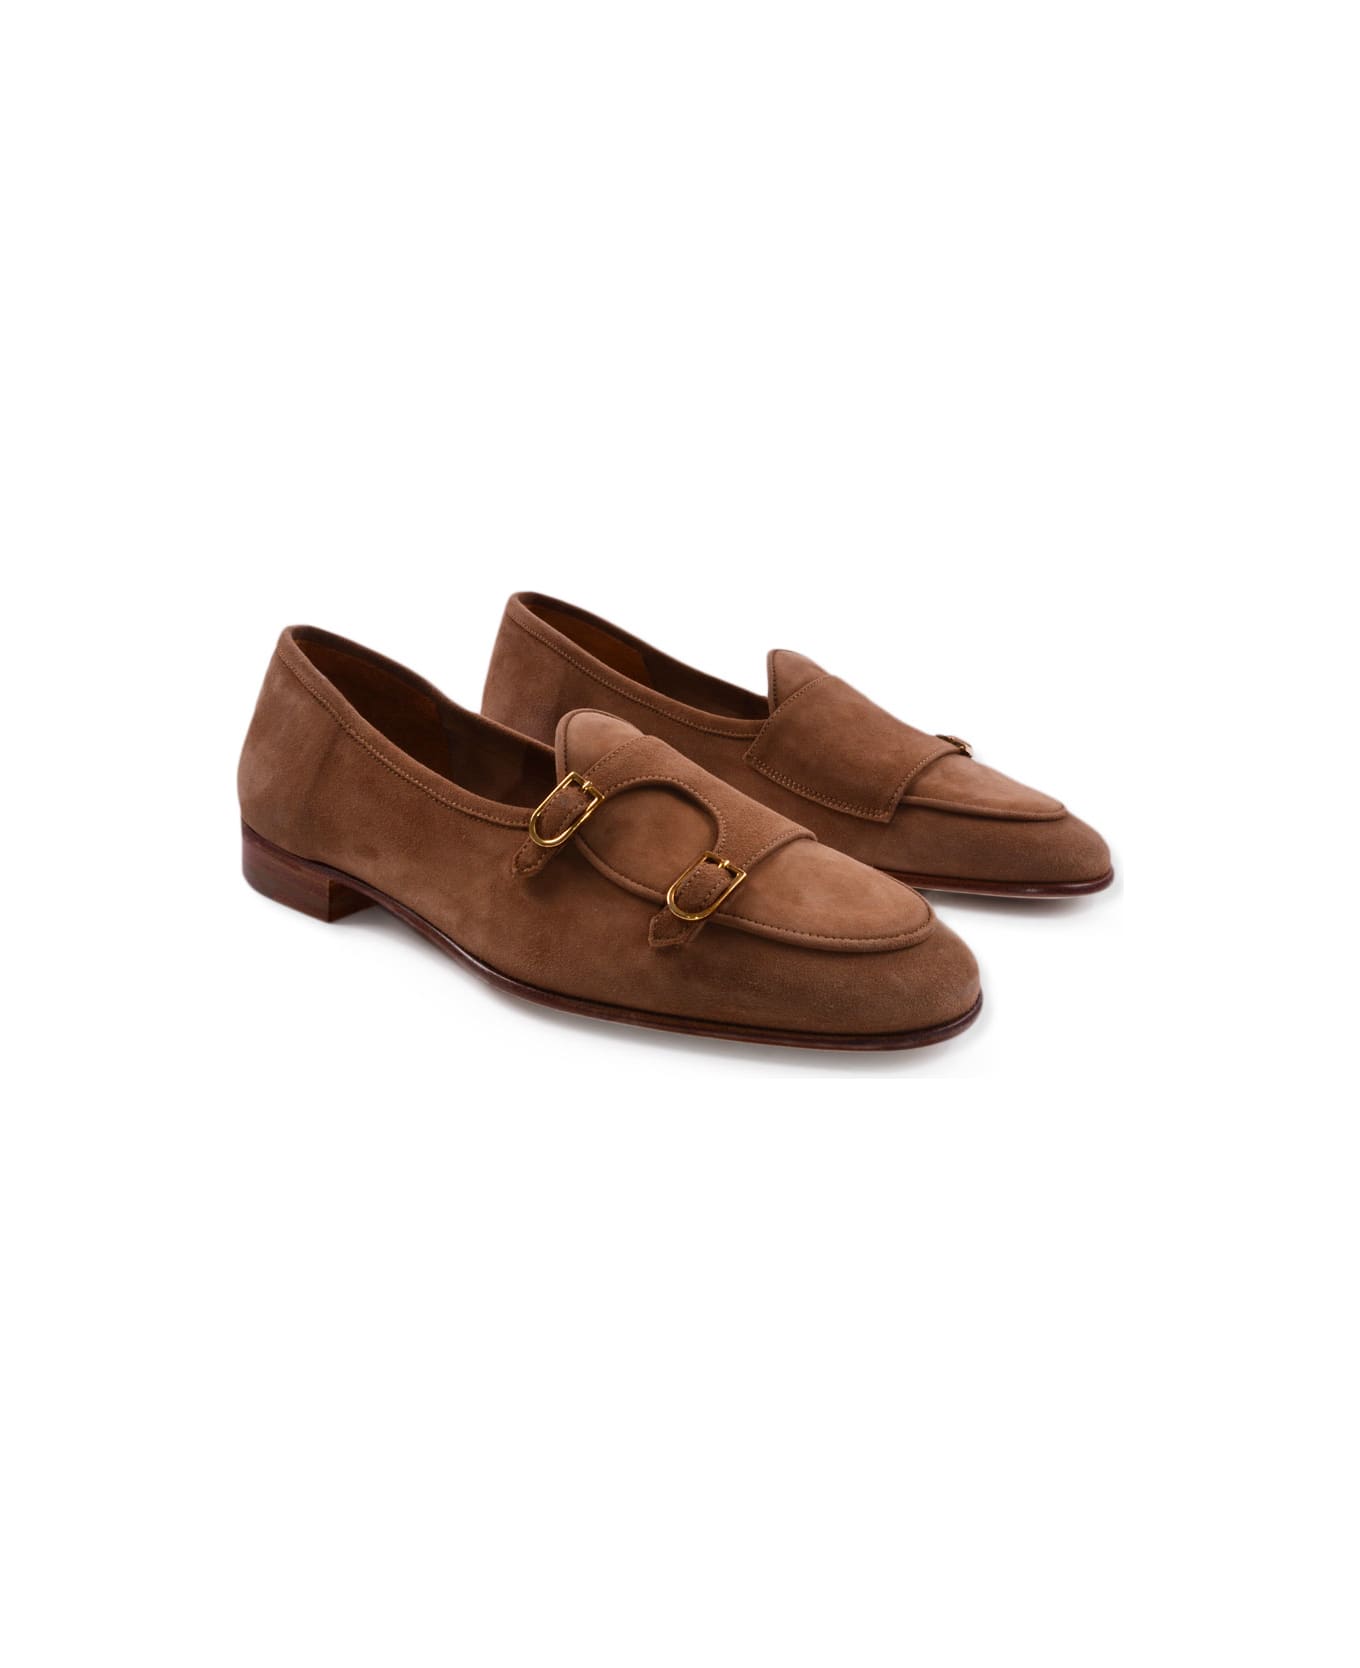 Edhen Milano Loafers - Brown